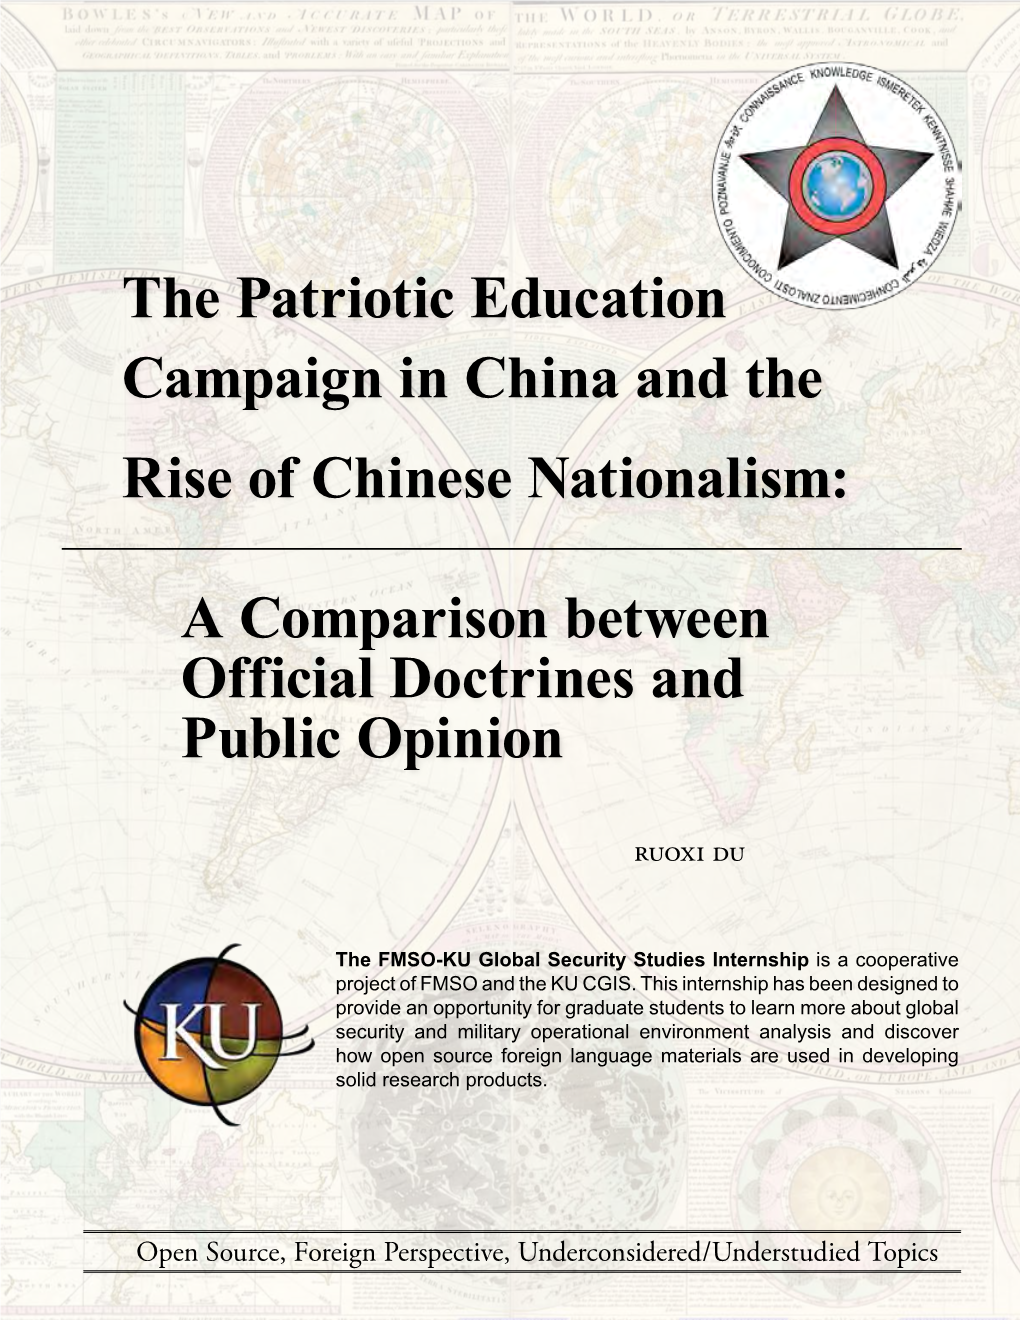 The Patriotic Education Campaign in China and the Rise of Chinese Nationalism